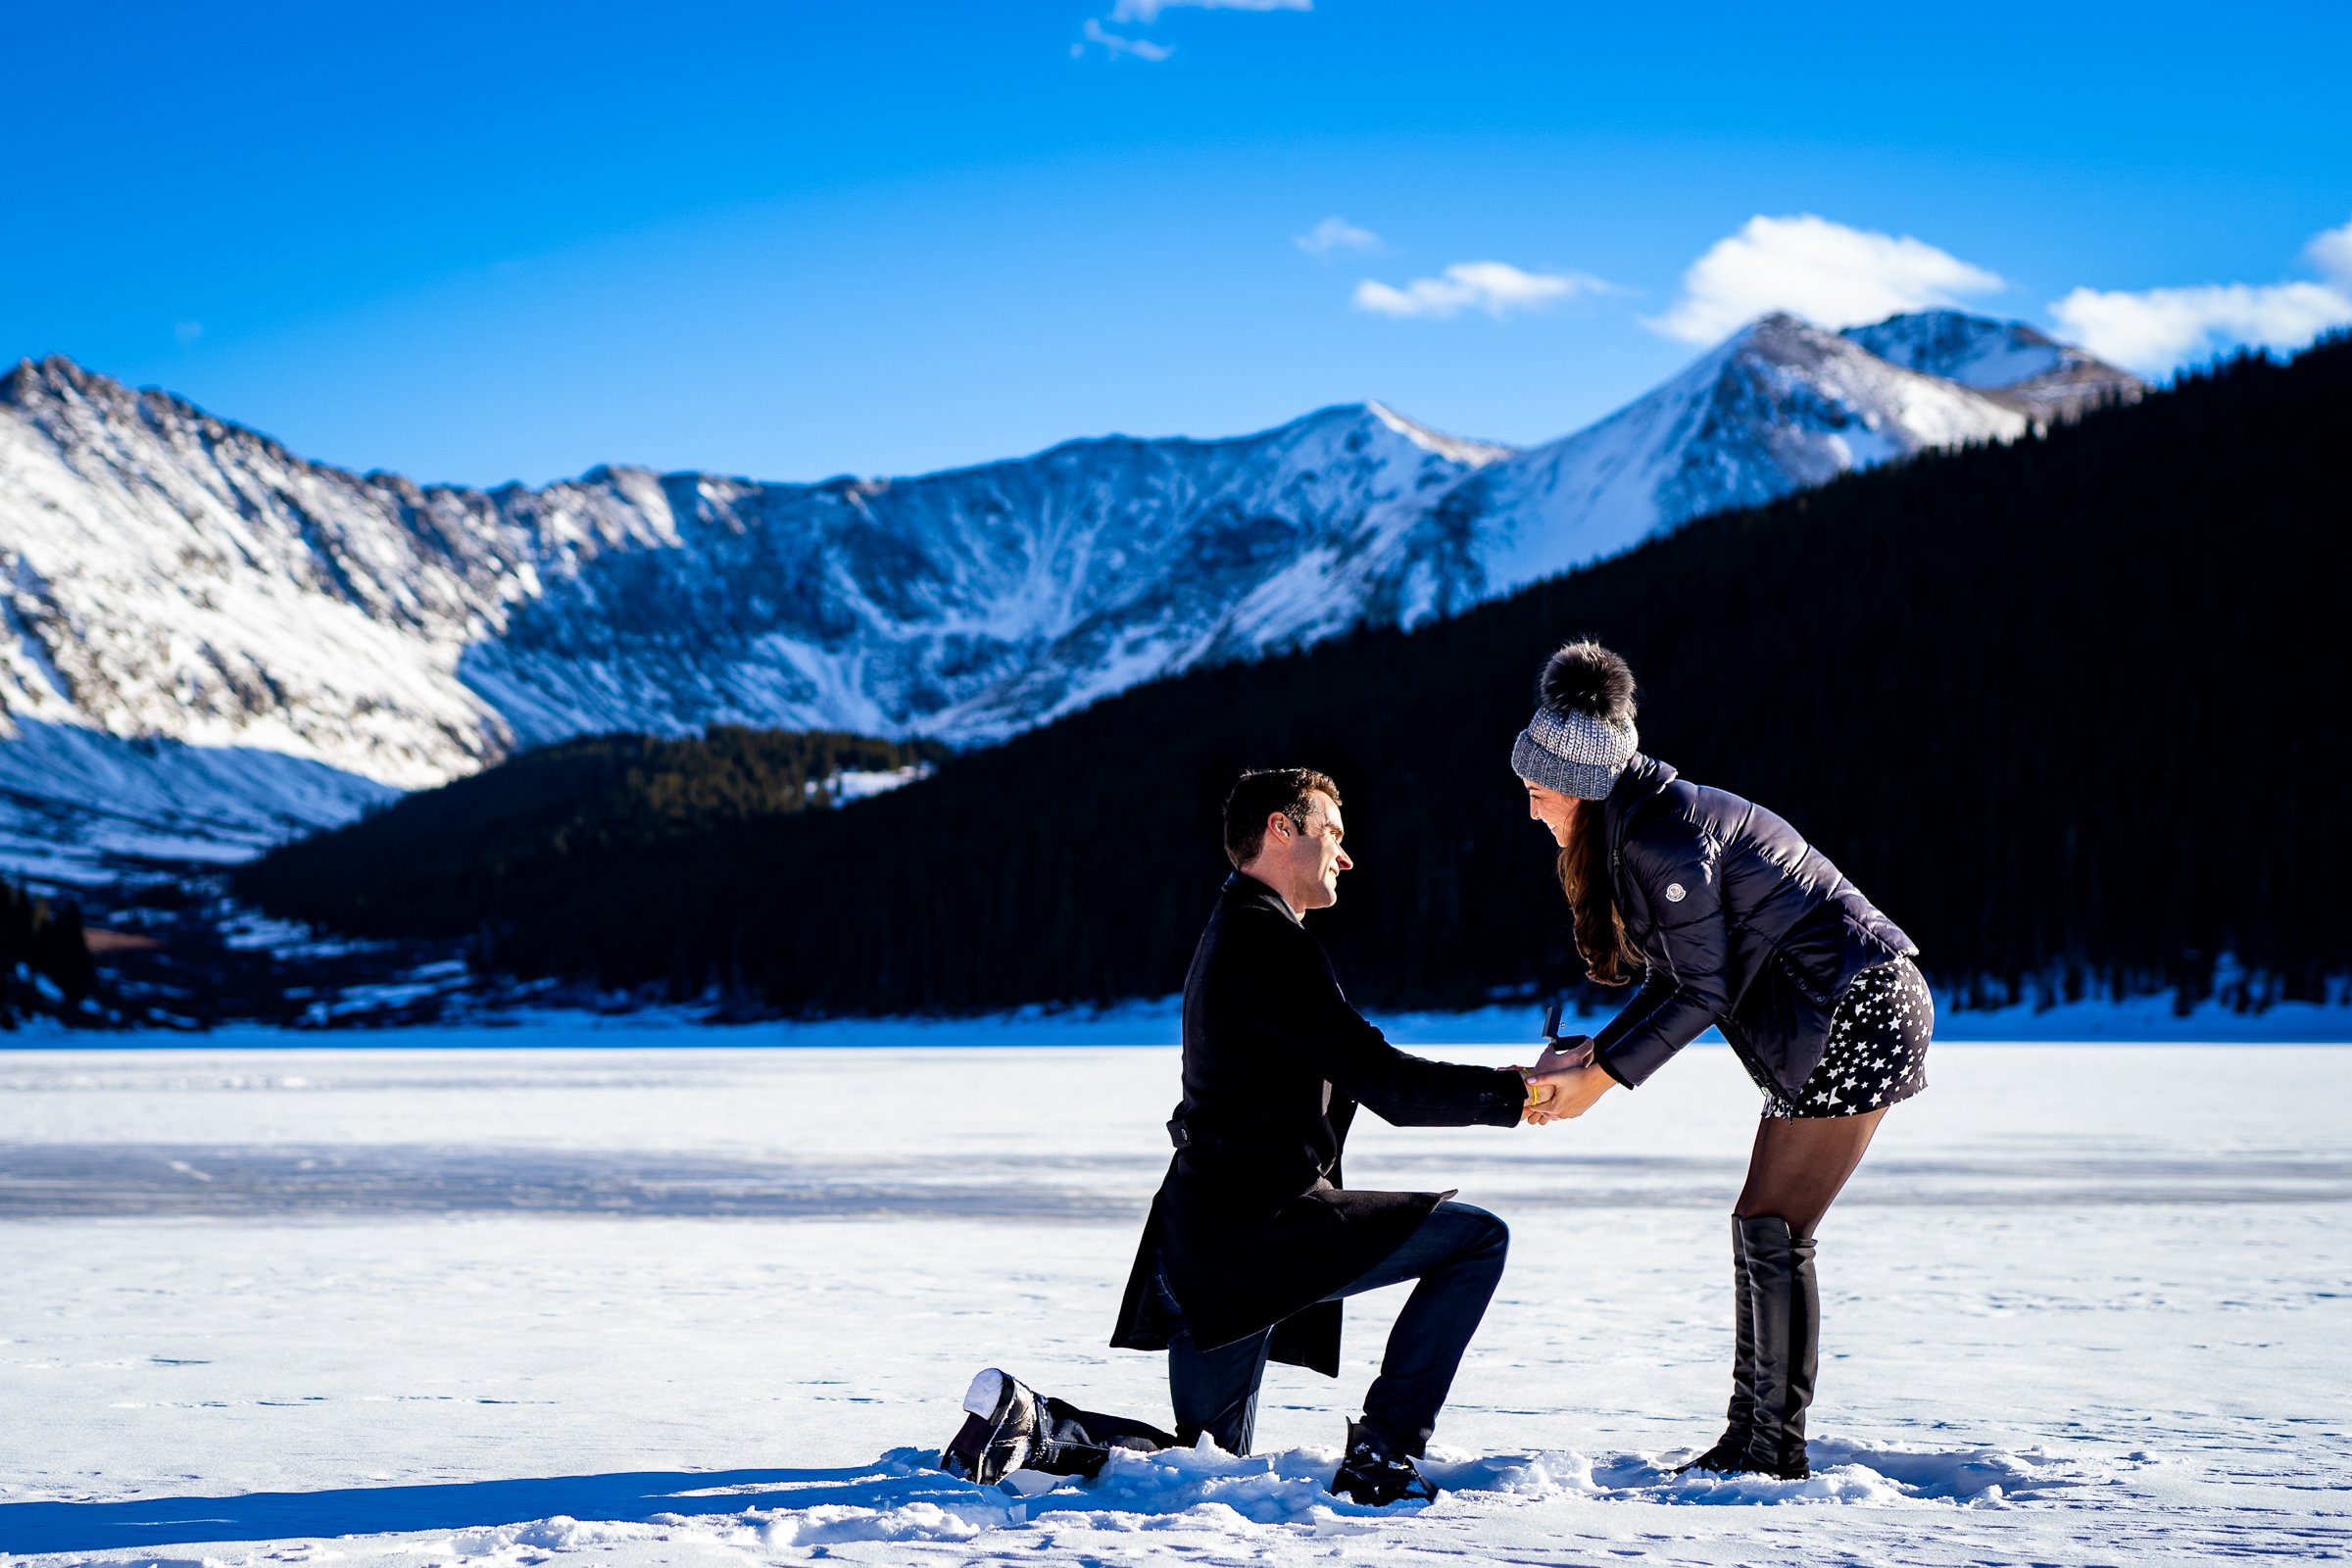 Man proposes to girlfriend while standing on a frozen lake with snowcapped mountains in the background, Engagement Session, Engagement Photos, Engagement Photos Inspiration, Engagement Photography, Engagement Photographer, Winter Engagement Photos, Proposal Photos, Proposal Photographer, Proposal Photography, Winter Proposal, Mountain Proposal, Proposal Inspiration, Summit County engagement session, Summit County engagement photos, Summit County engagement photography, Summit County engagement photographer, Summit County engagement inspiration, Colorado engagement session, Colorado engagement photos, Colorado engagement photography, Colorado engagement photographer, Colorado engagement inspiration, Clinton Gulch Engagement